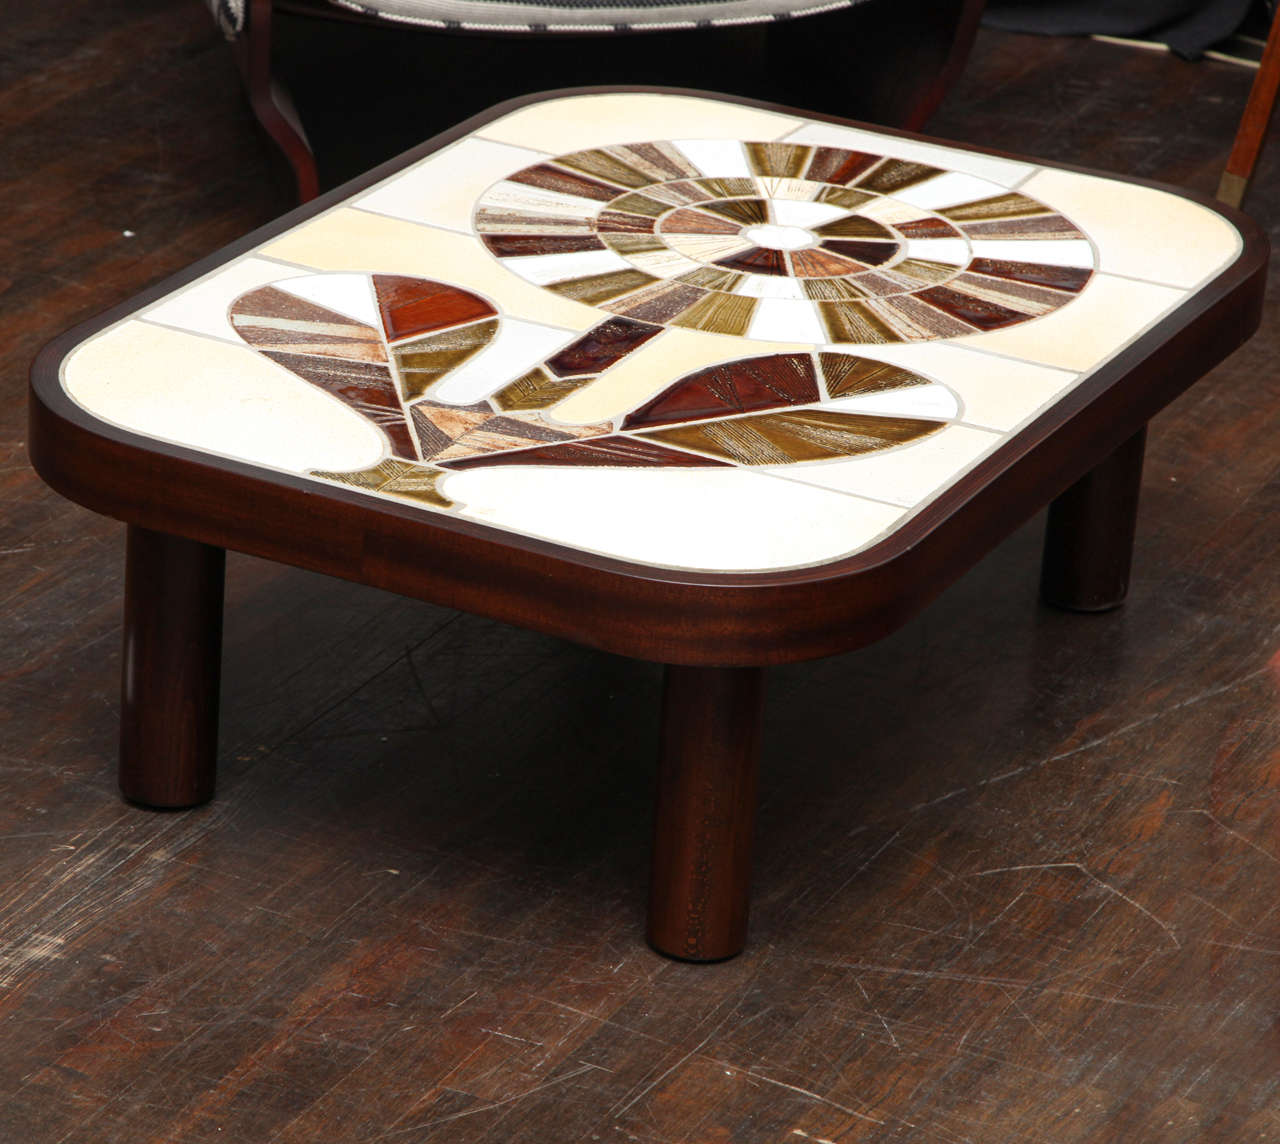 Handmade low table with great proportions. Walnut frame with rounded corners and ceramic design inset onto the top depicting a graphic flower. Signed in the ceramic.